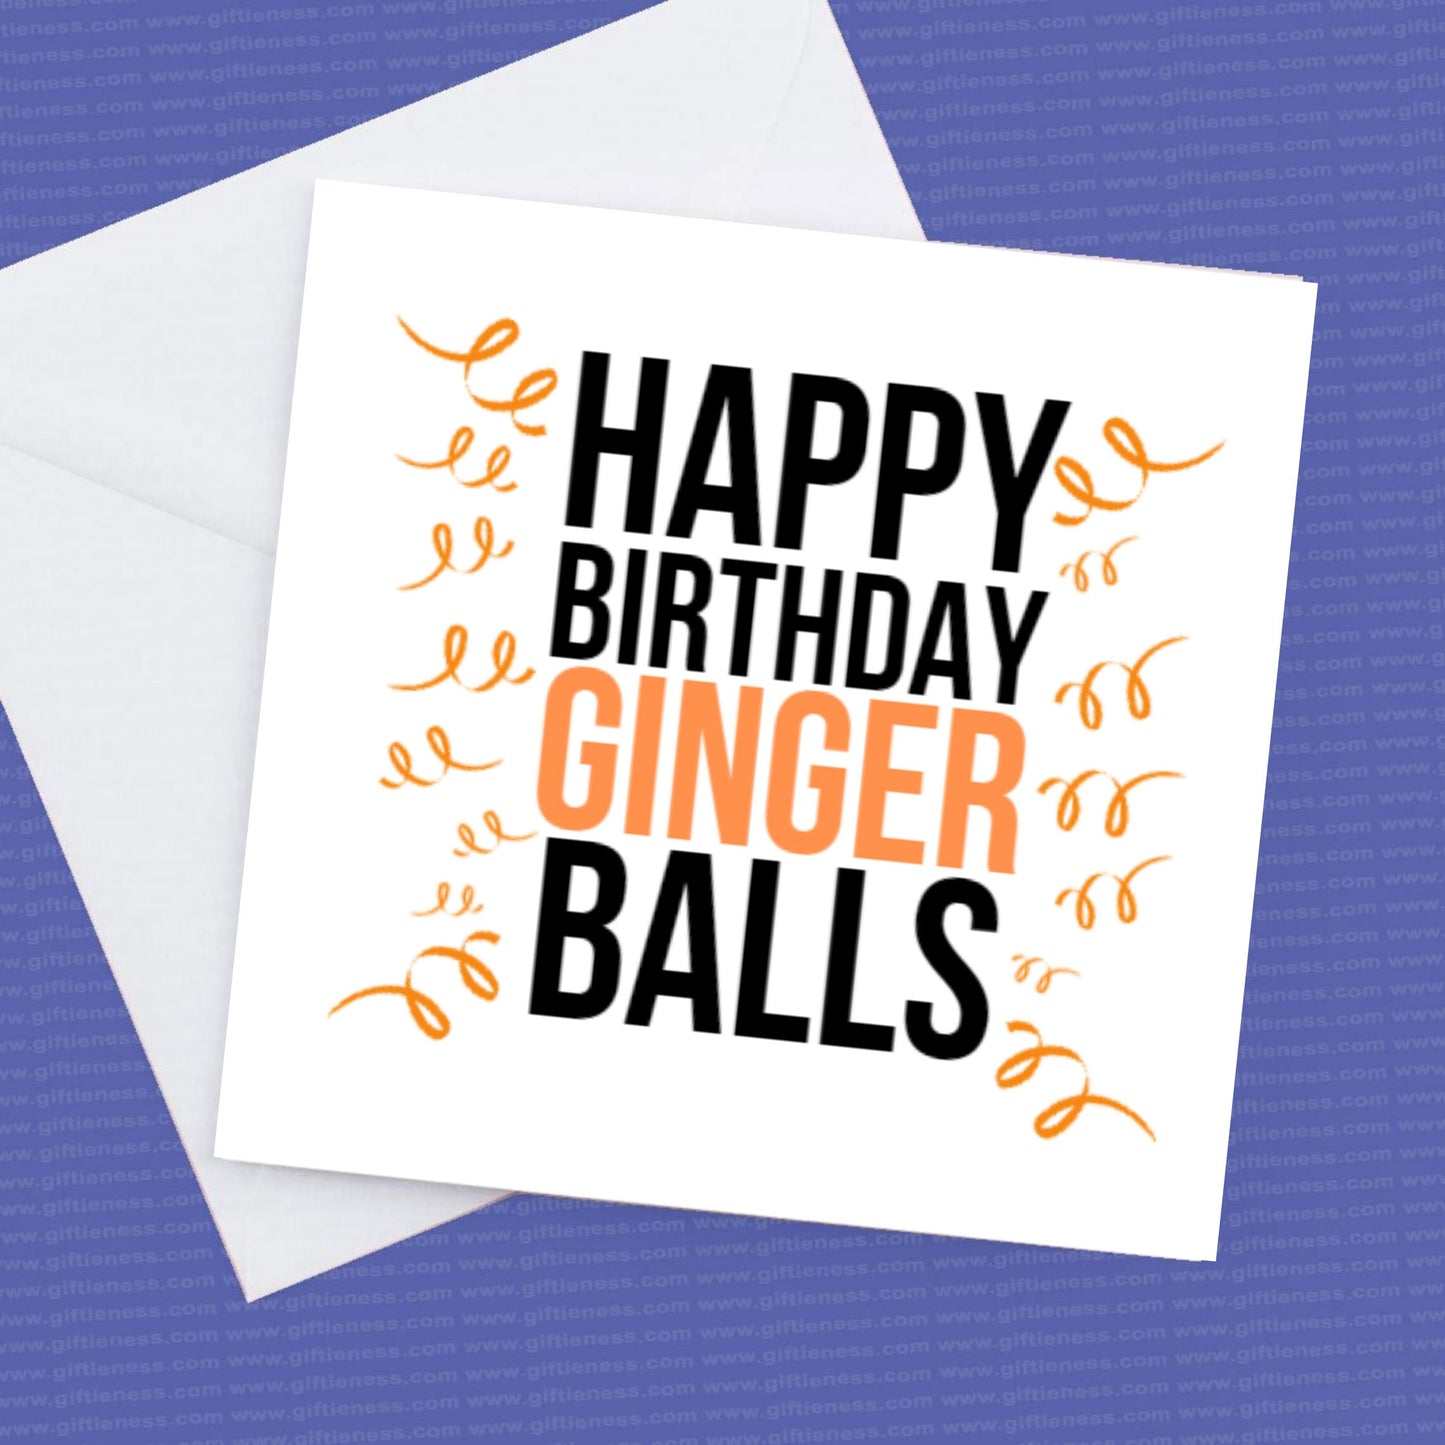 Happy Birthday Ginger Balls, Card for that Ginger Top and Tail friend